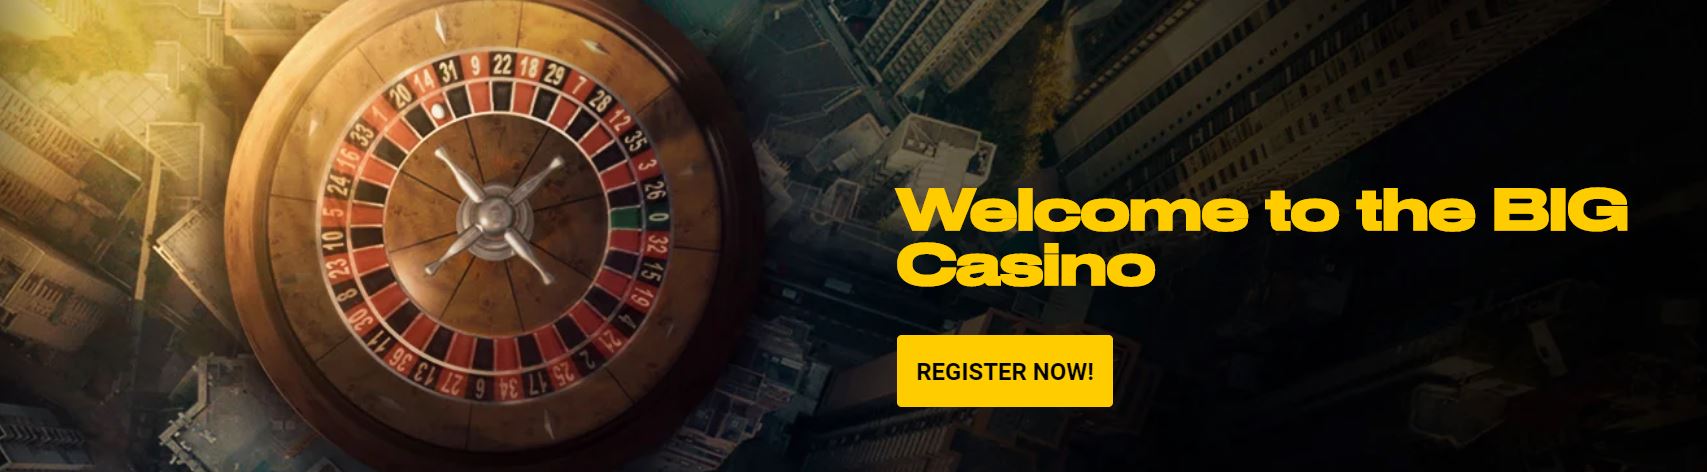 Online roulette comes with welcome promotions.